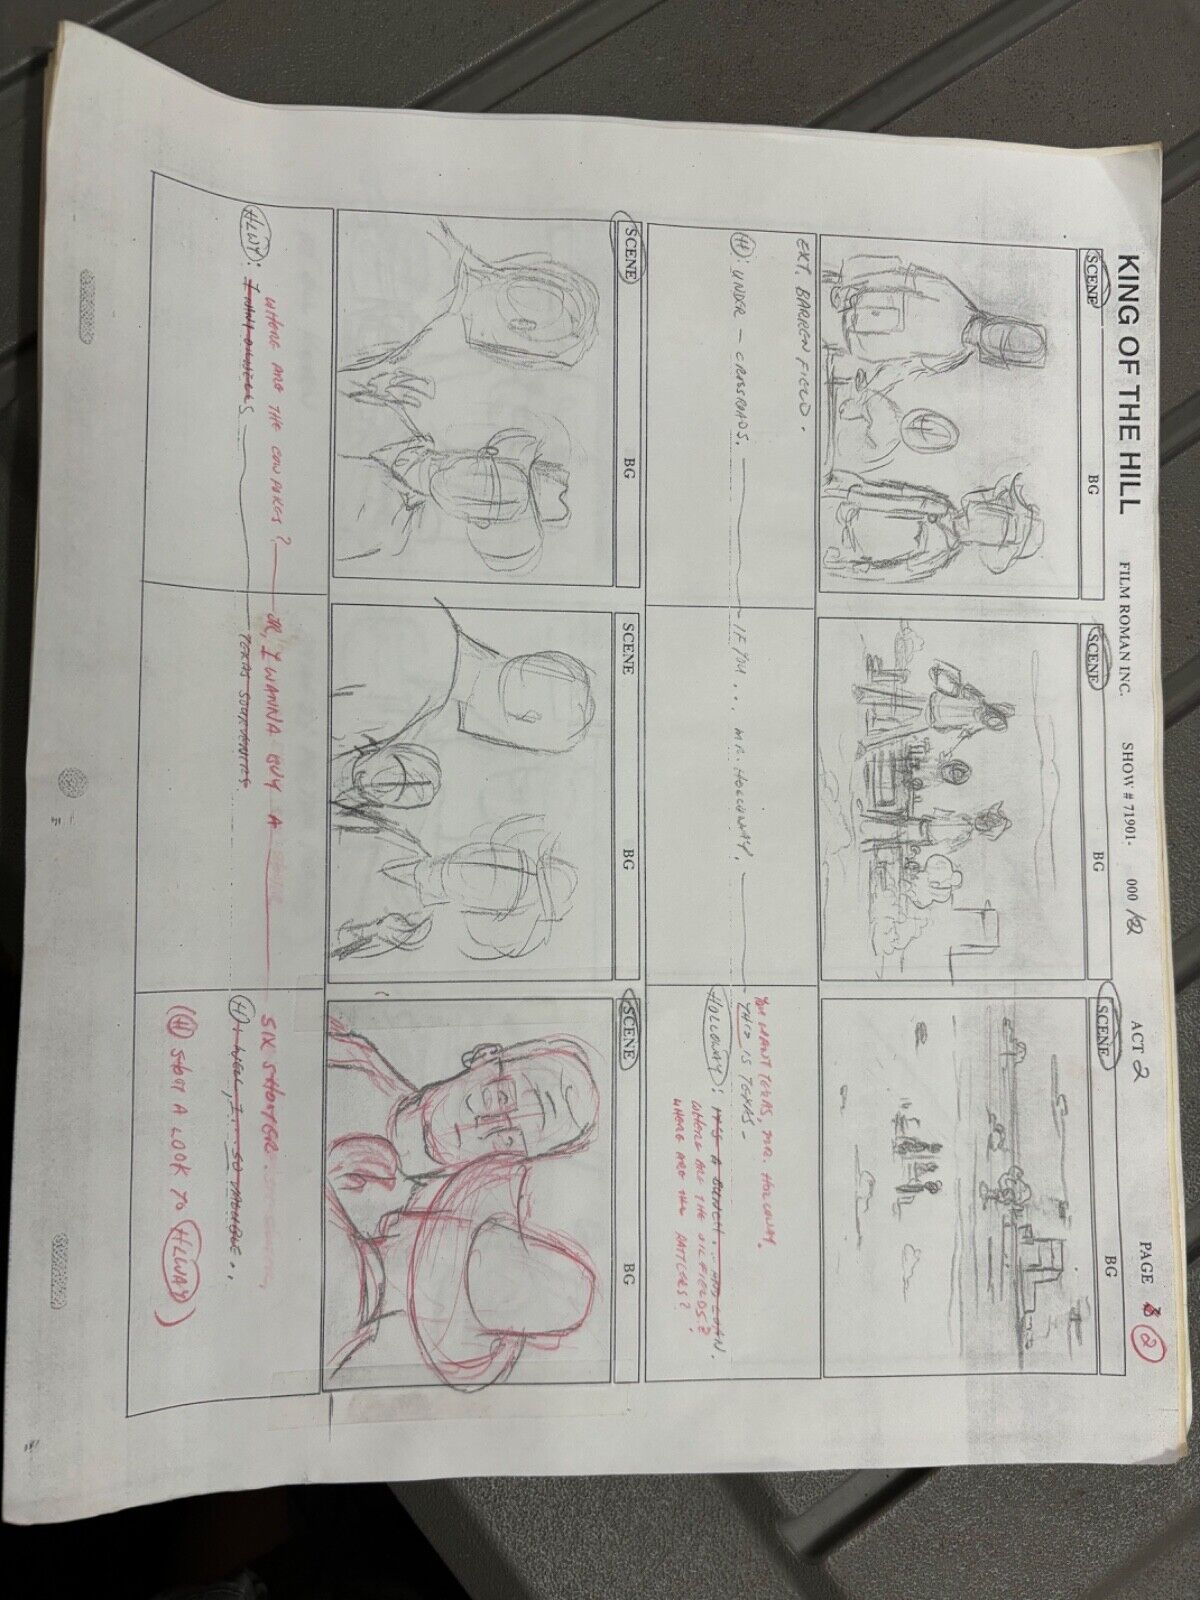 king of the hill story board